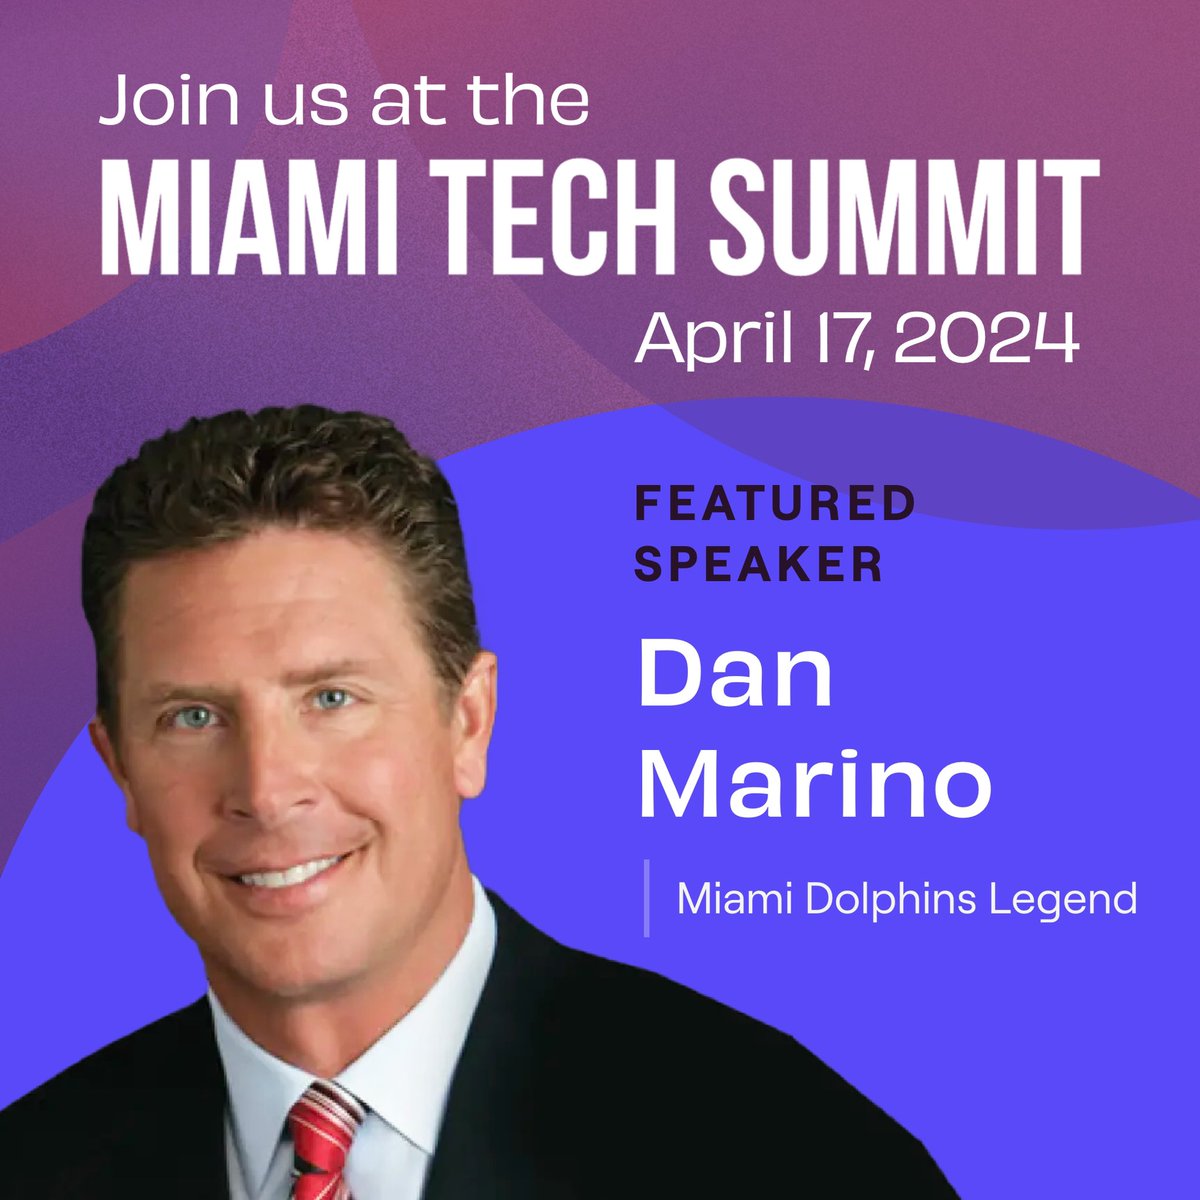 Excited to announce that I will be interviewing Miami Dolphins legend @DanMarino at next week’s @miami_summit at the @PAMM - can’t wait to discuss his career on, and off, the field. Go Dolphins!!! @MiamiDolphins #GoFins #MiamiTechSummit #SayfieReview